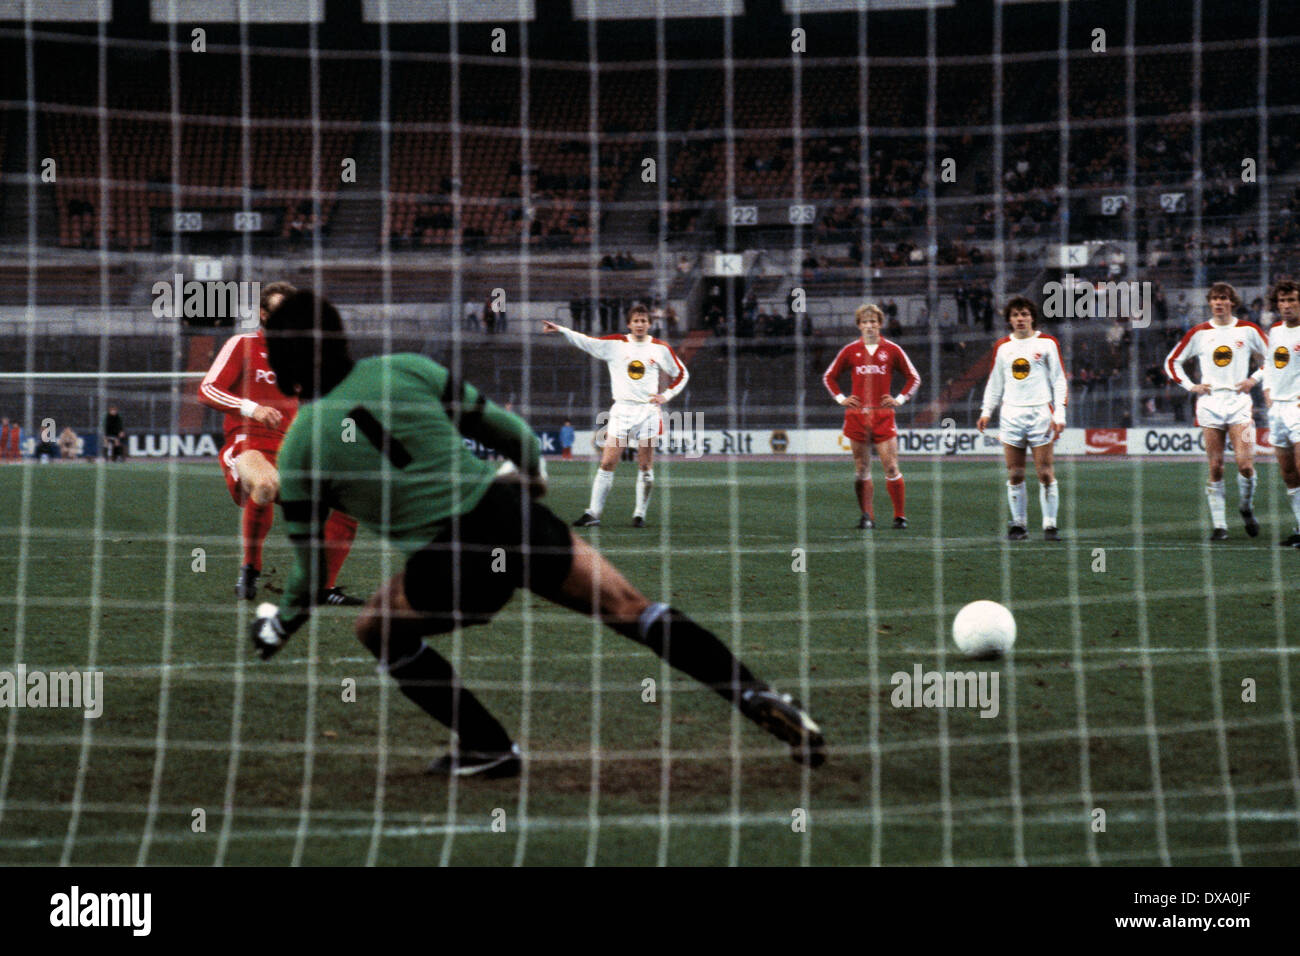 football, Bundesliga, 1981/1982, Rhine Stadium, Fortuna Duesseldorf versus 1. FC Kaiserslautern 4:2, scene of the match, Hans-Peter Briegel (FCK) left covered scores the 3:2 goal by penalty resulting from a foul, keeper Horst Dreher (Fortuna) is chanceles Stock Photo